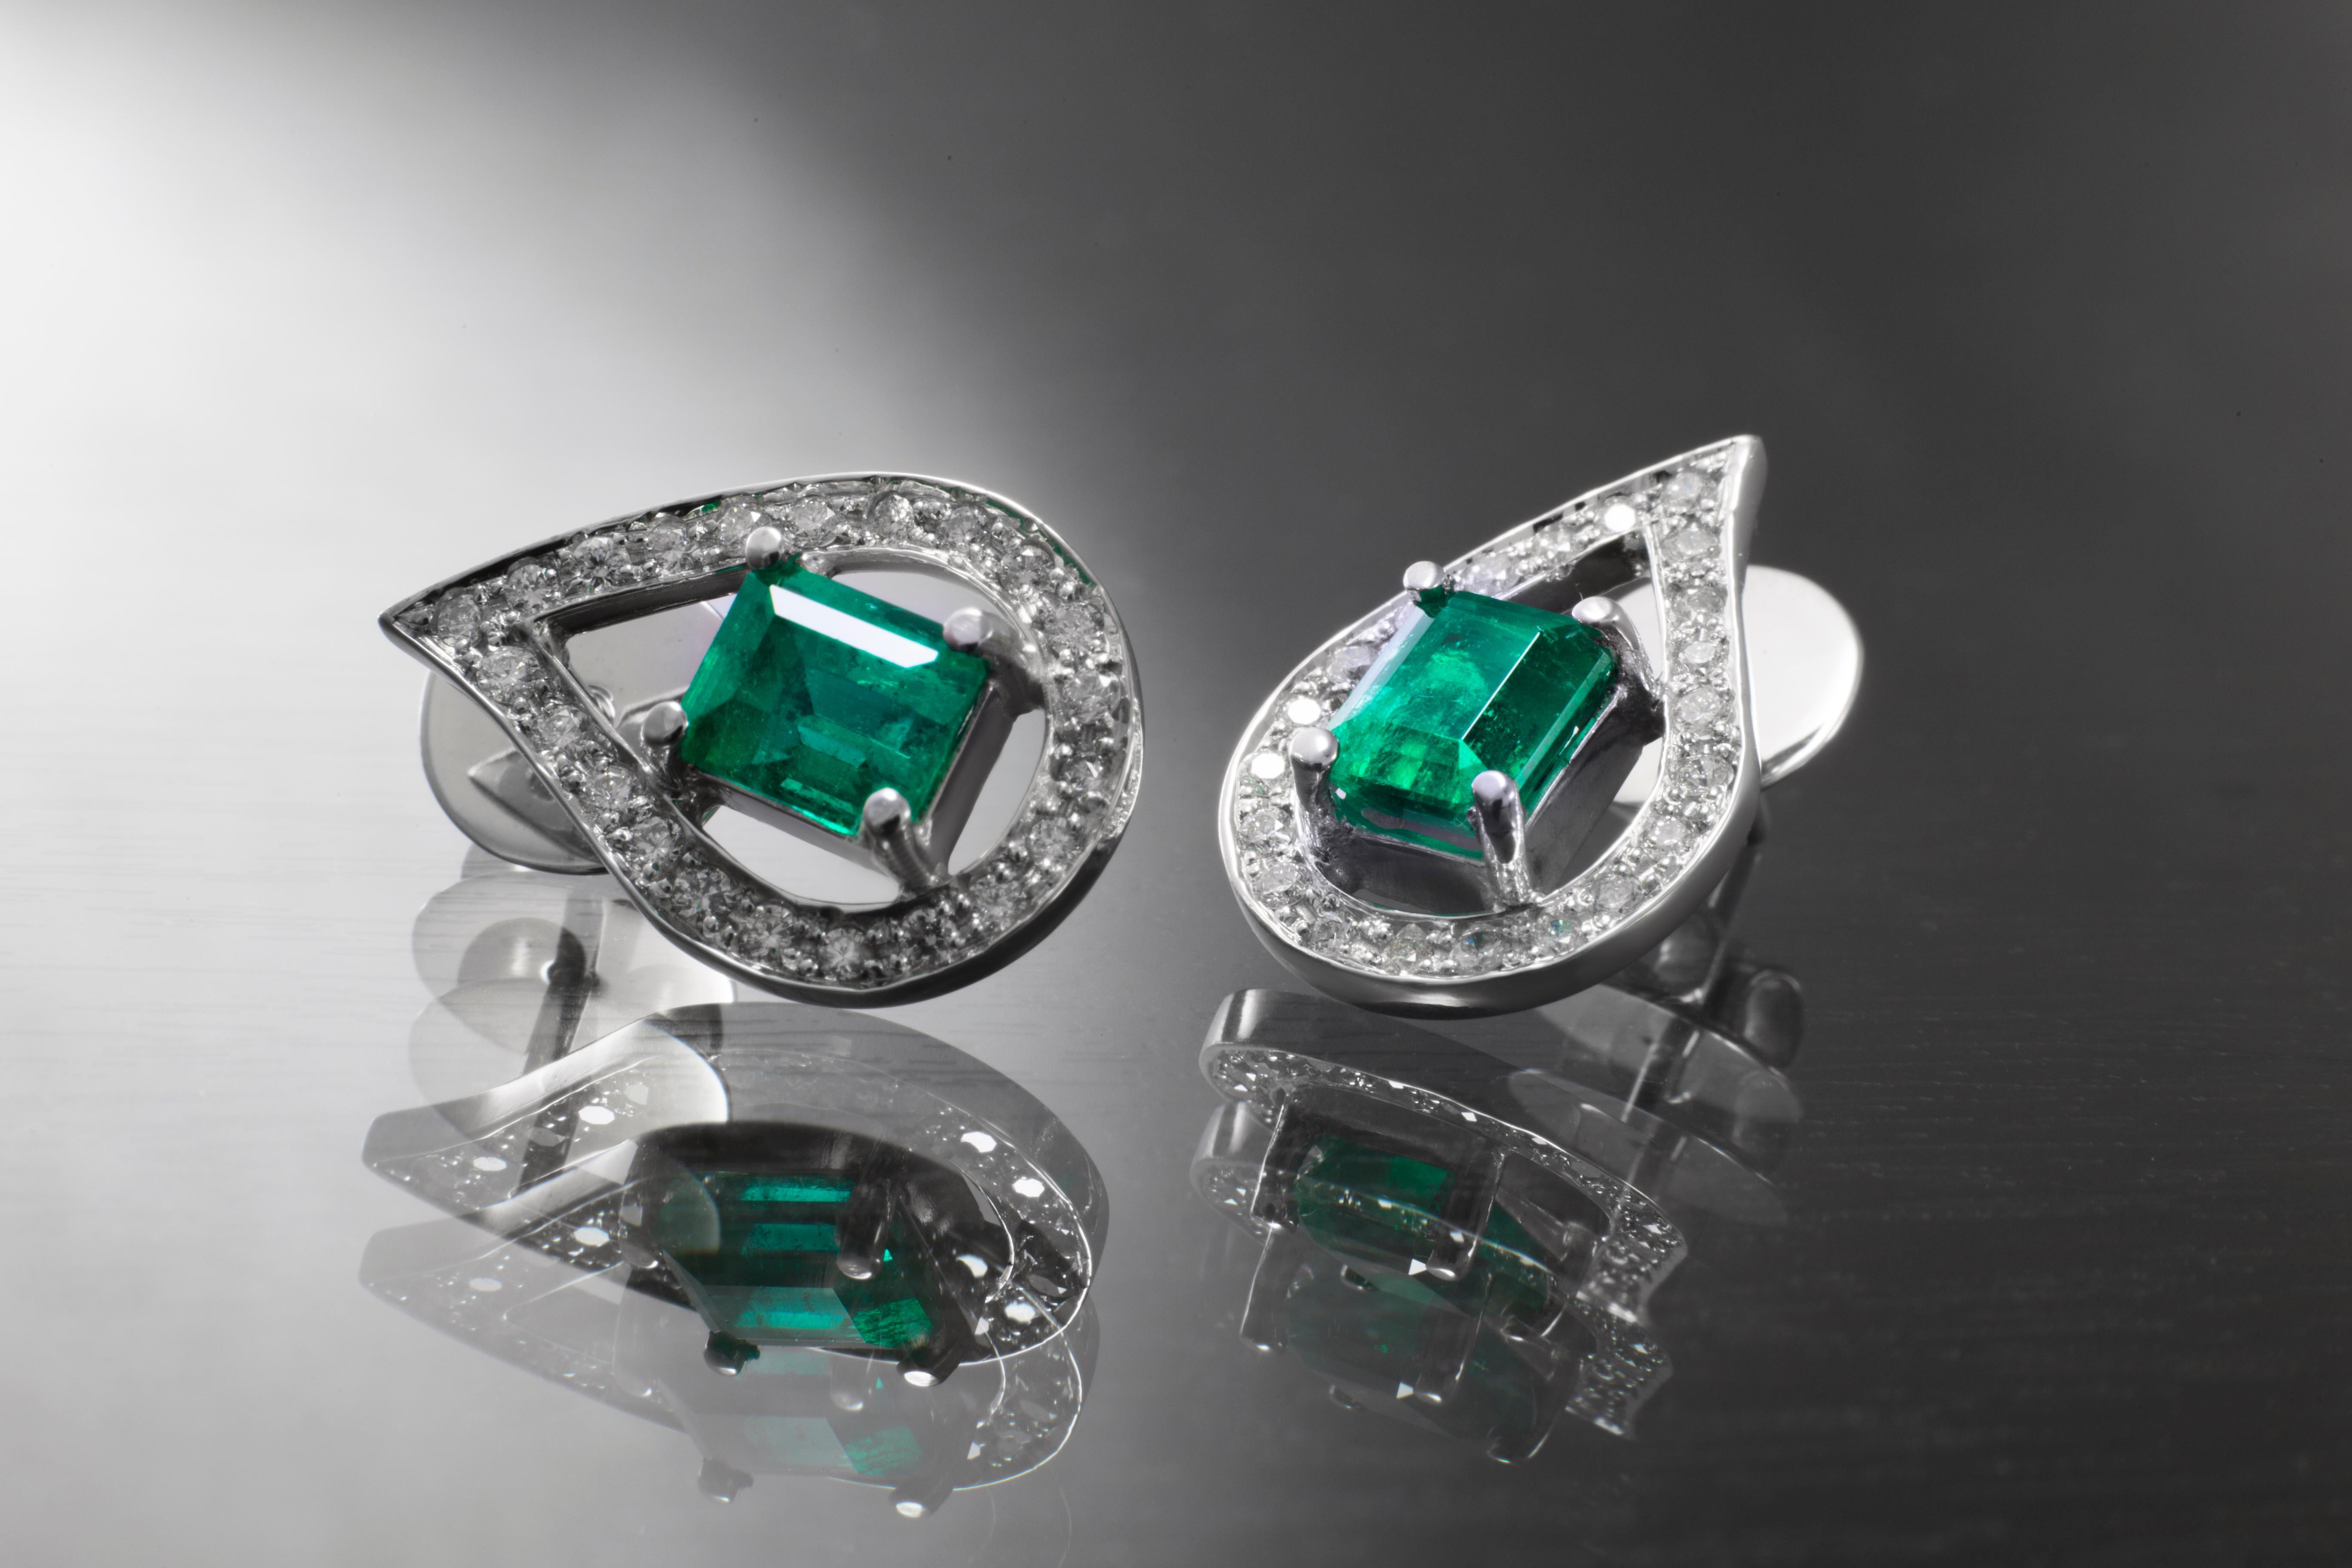 Comprising 2 certified Colombian Muzo emeralds, one of 1.03 carat F1 quality and one of 1.1 carats F 2quality, set in 18 carat white gold, surrounded by a diamond melee, consisting of 21  individual, brilliant cut diamonds.

The perfect